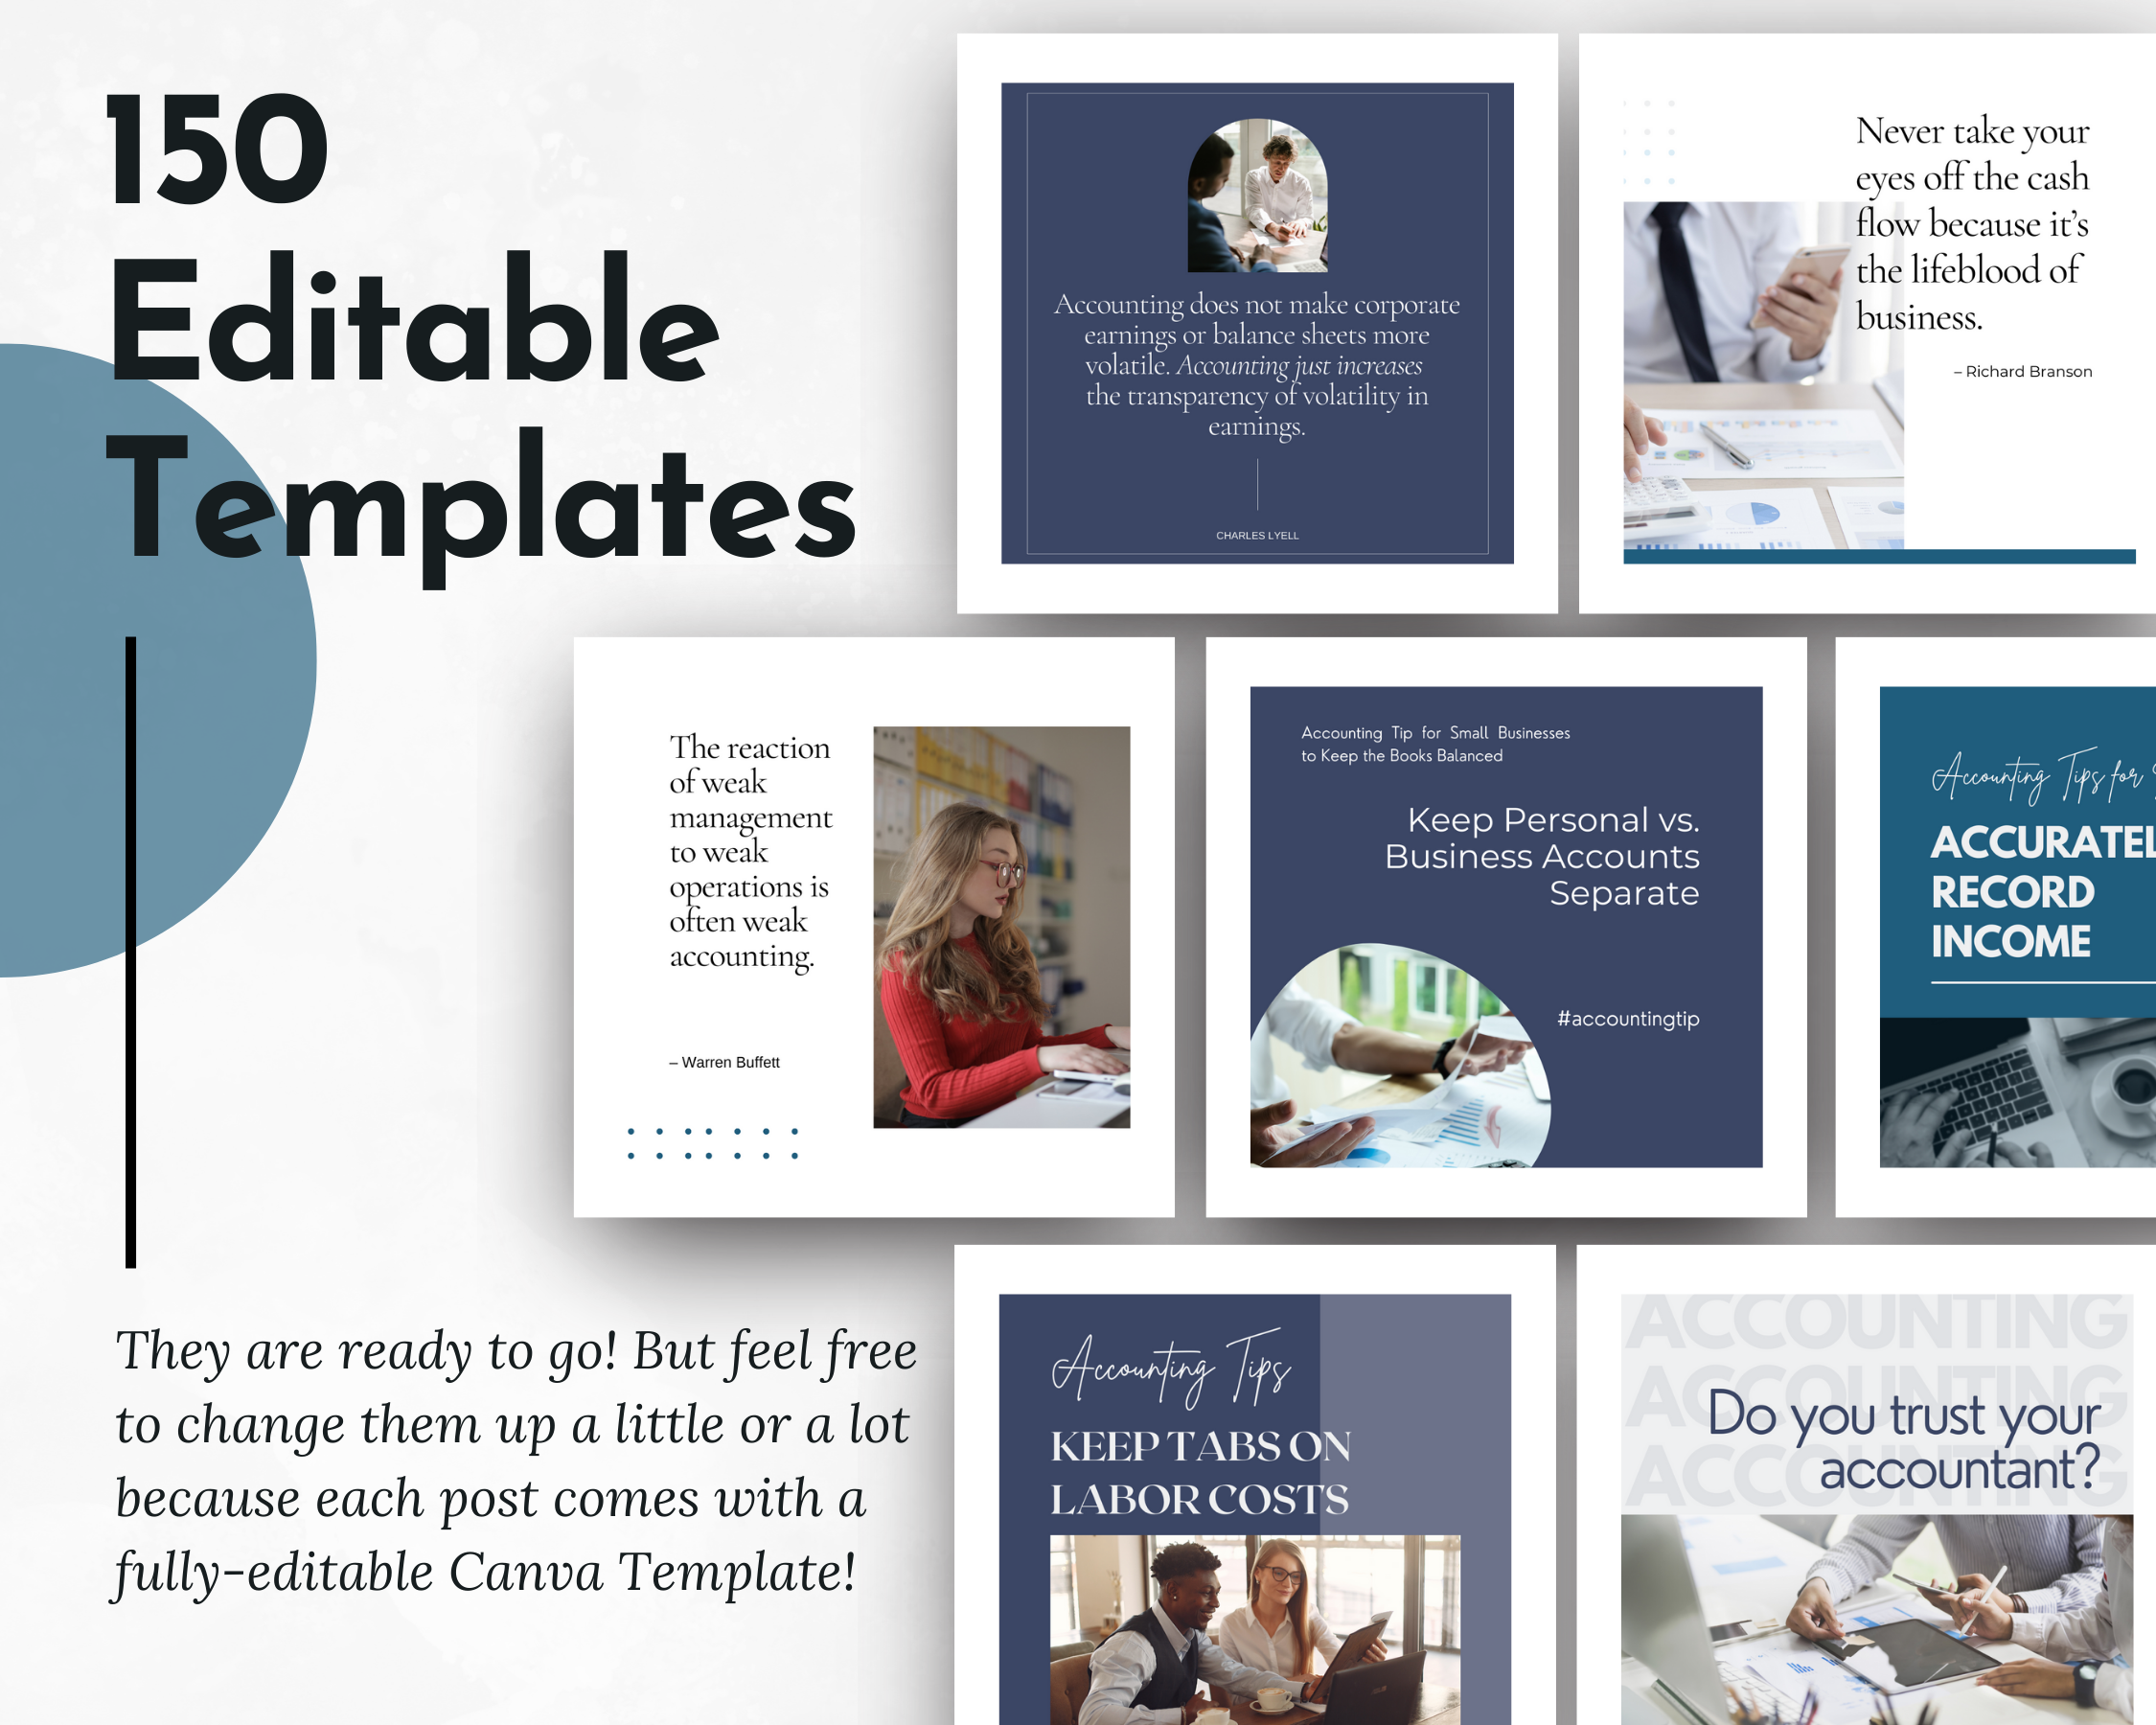 150 Account Socially Inclined Instagram templates for social media businesses.